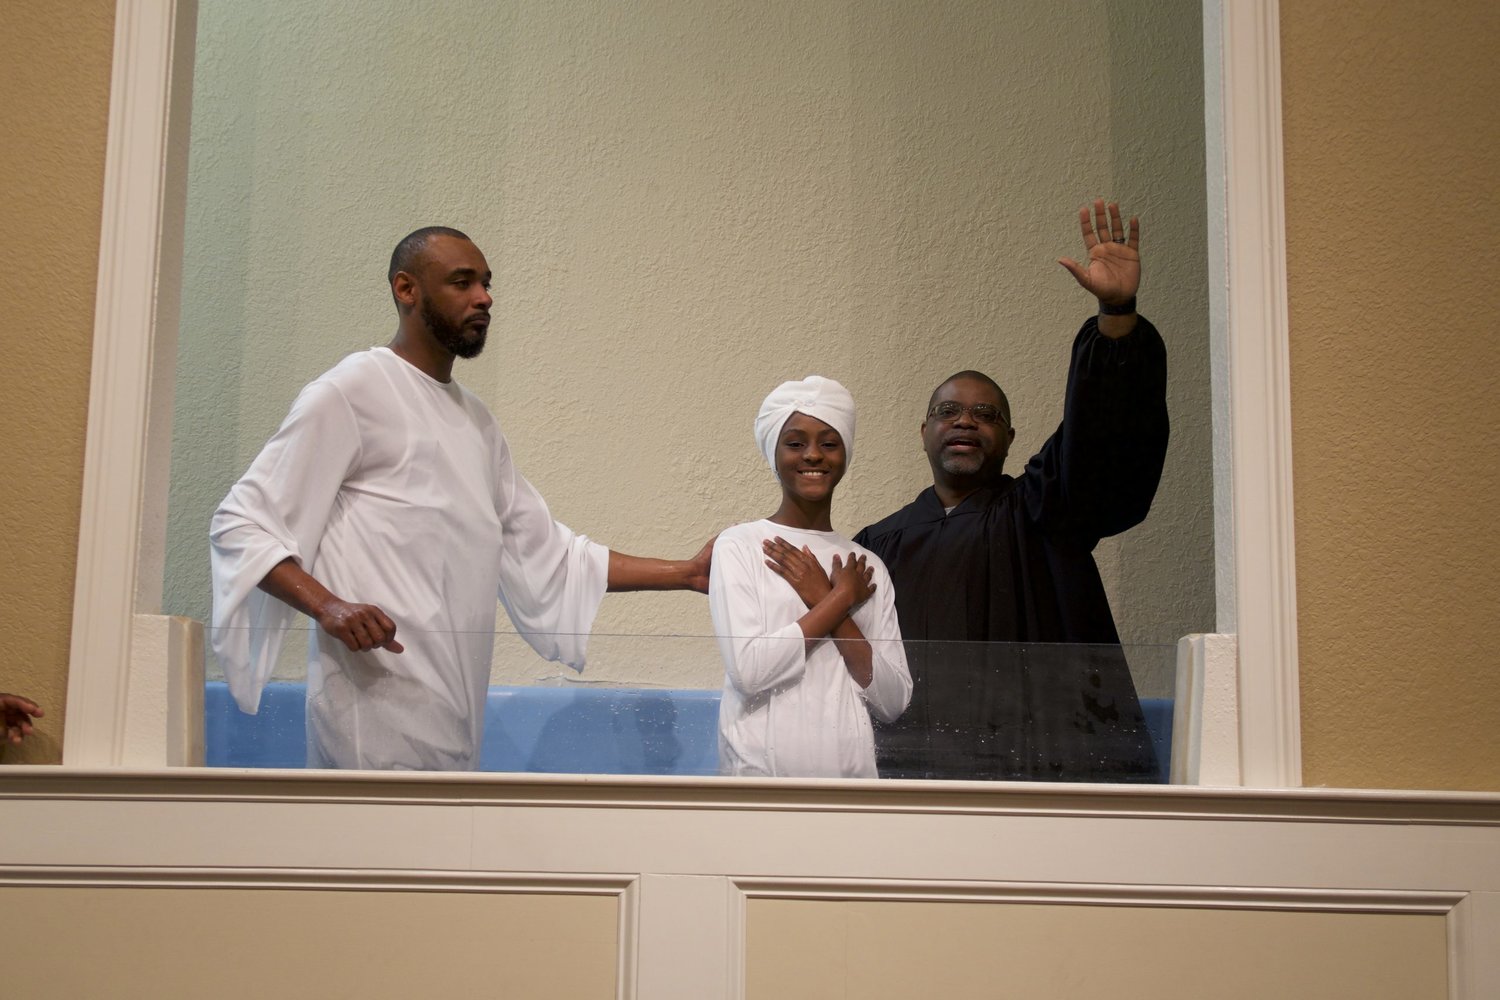 Pastor Adrian Taylor, right, of Springhill Missionary Baptist Church in Gainesville, Fla., rejoices after a baptism at the church. Taylor credits God and His unchanging Word for the church's growth.